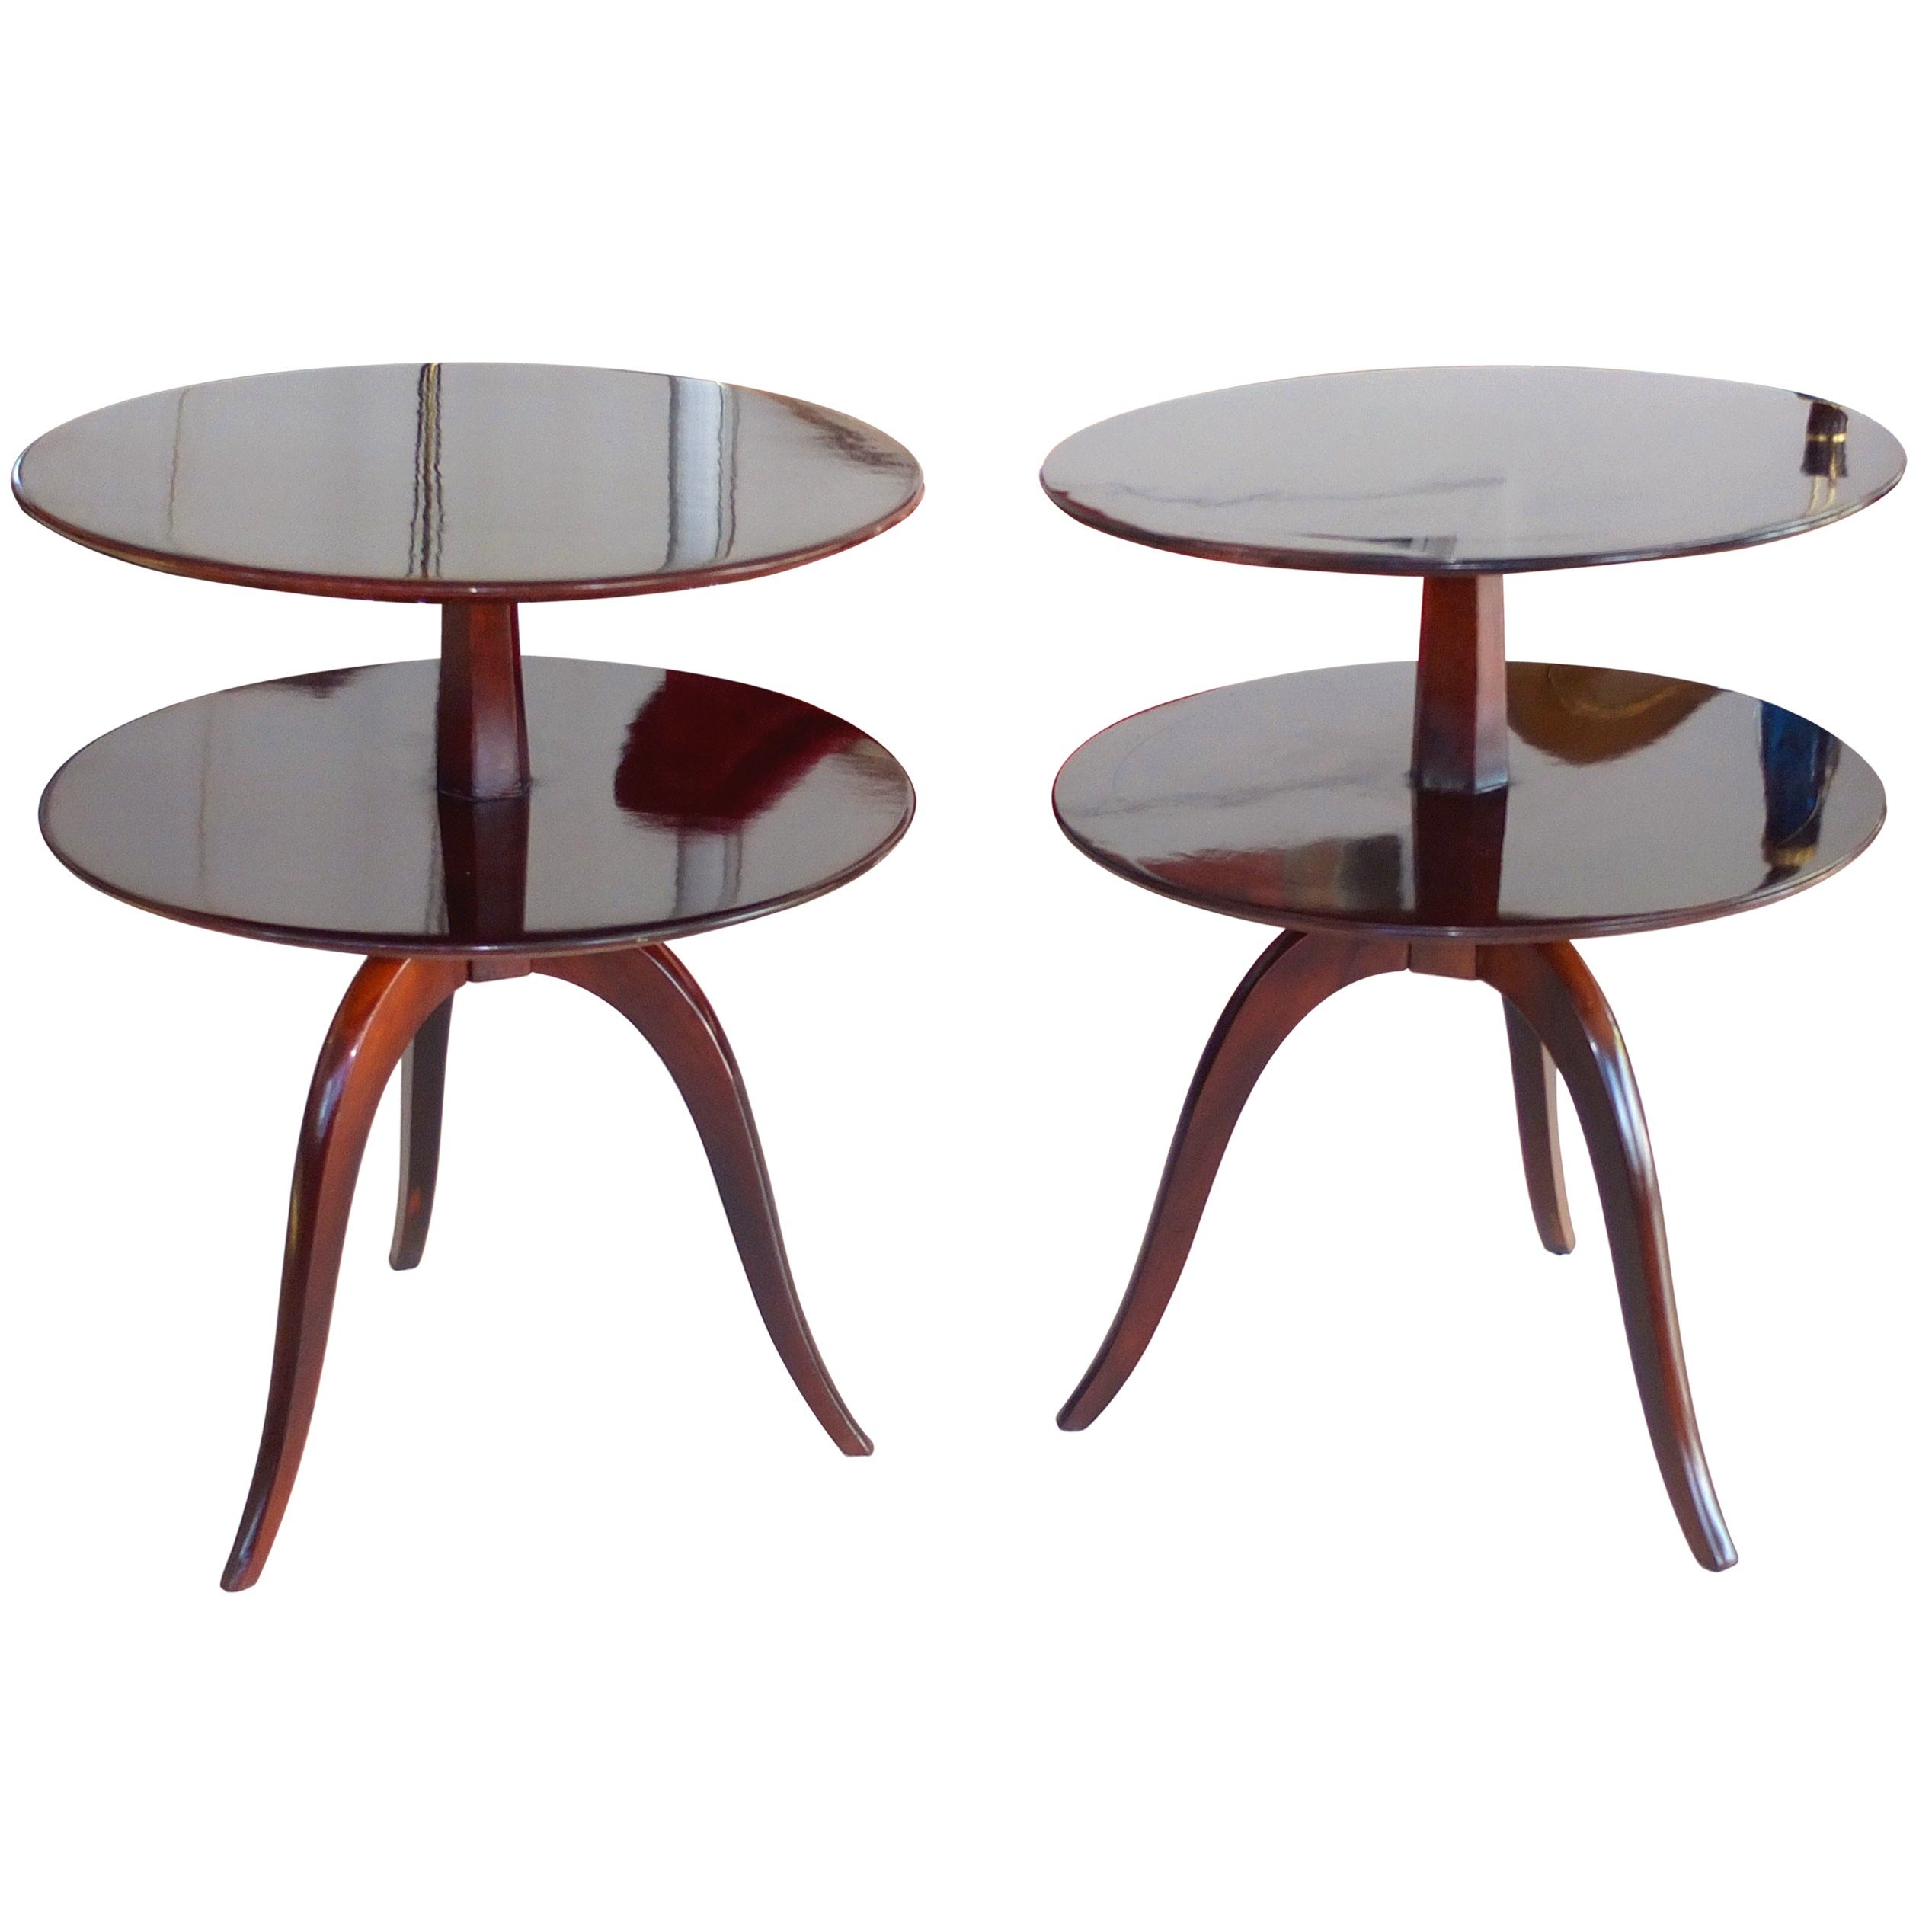 Pair of Round Two Tier Tables - Wormley & Frankl